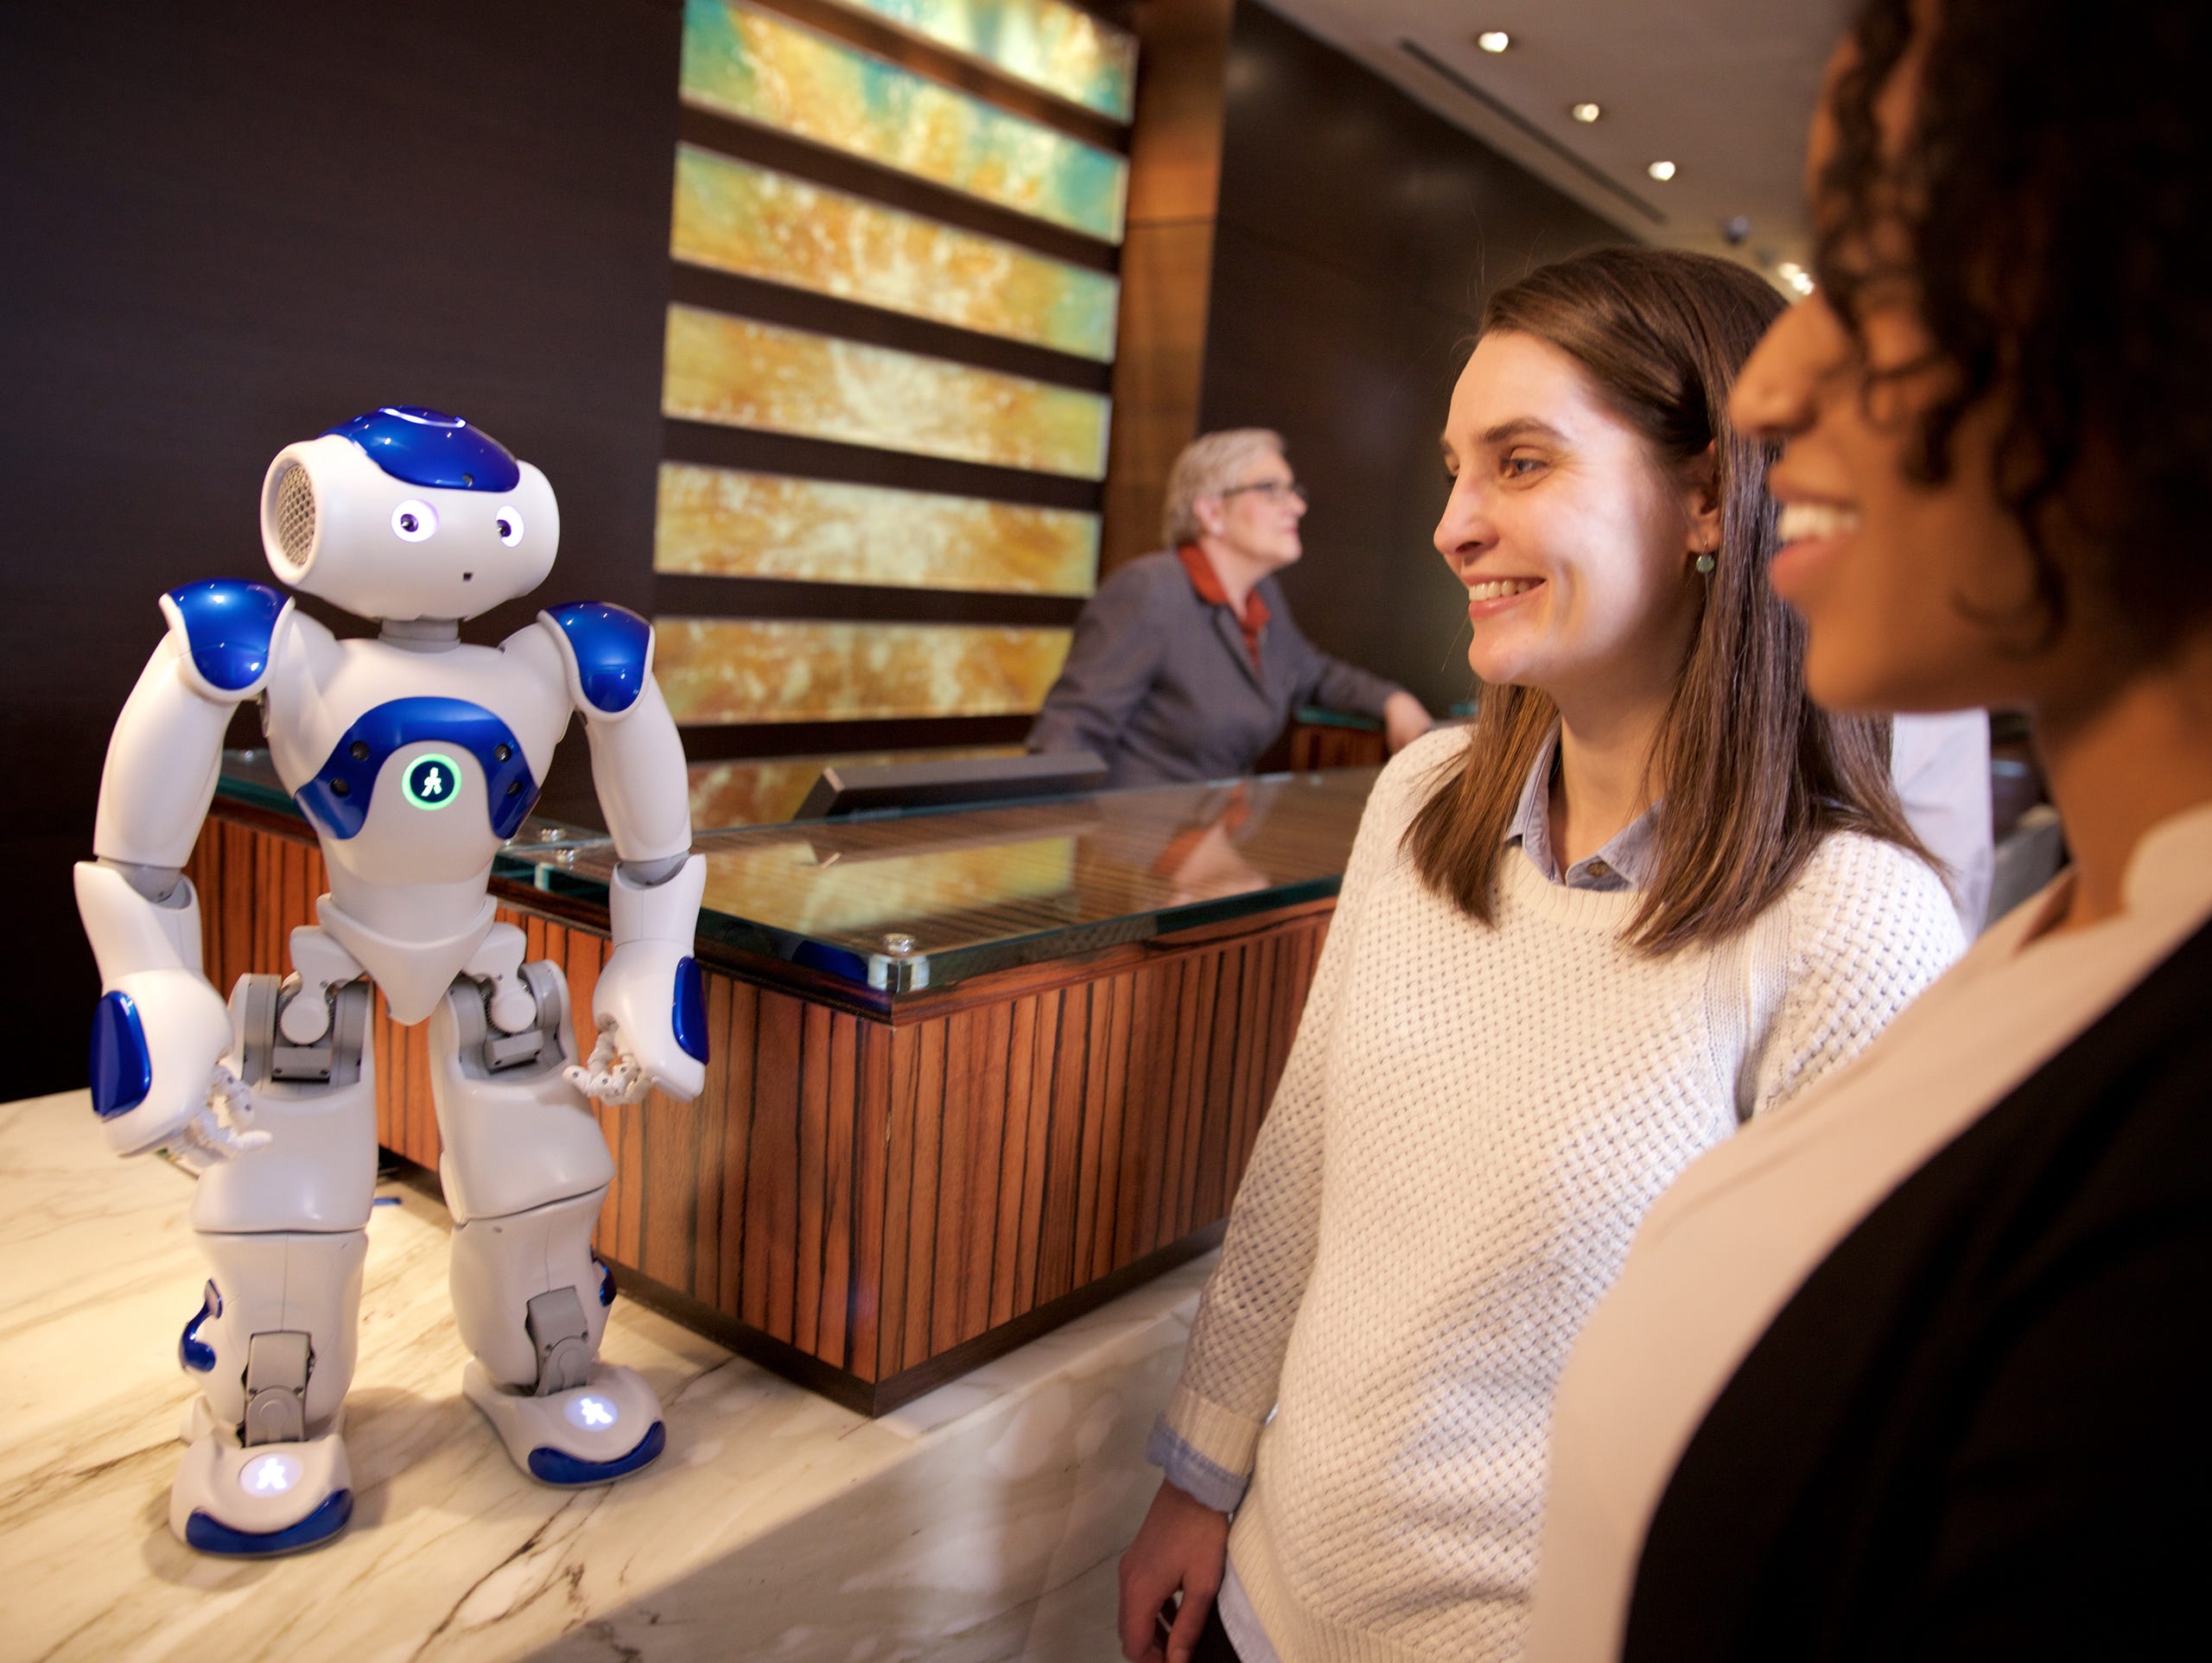 Hilton Worldwide is experimenting with a robot concierge named Connie.